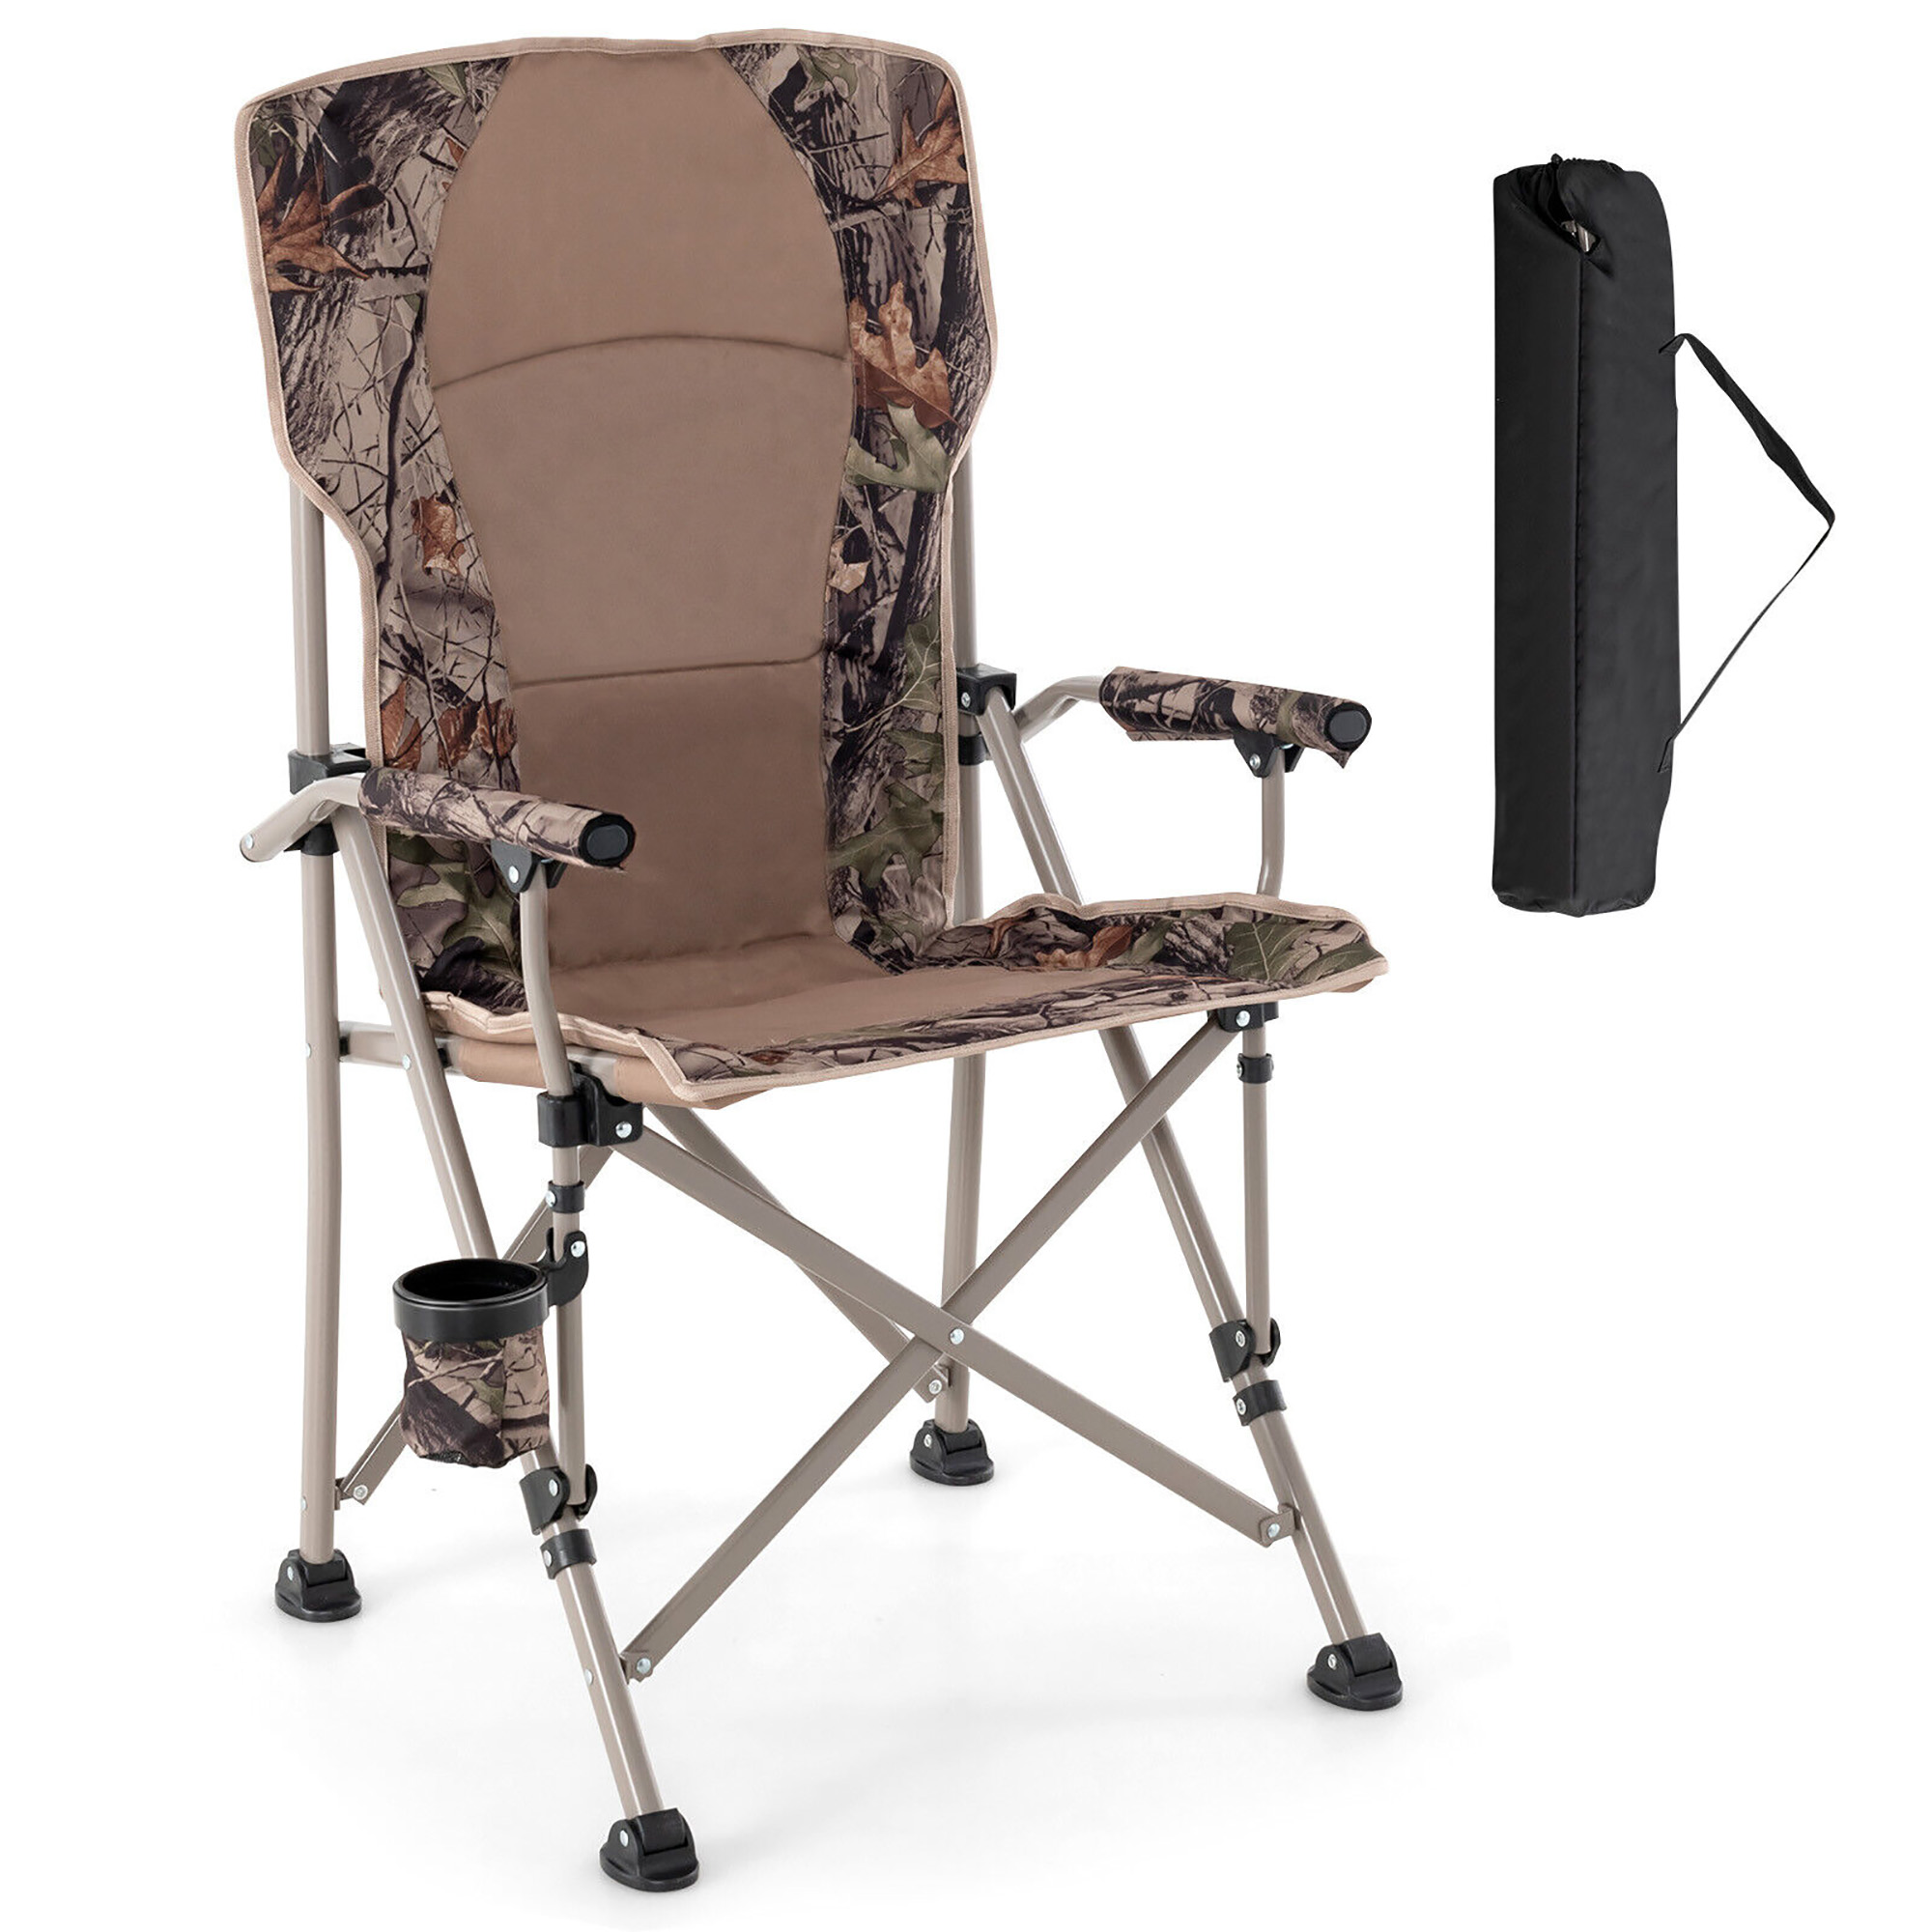 Gymax Portable Folding Arm Chair Heavy Duty 400 lbs with Cup Holder for Camping